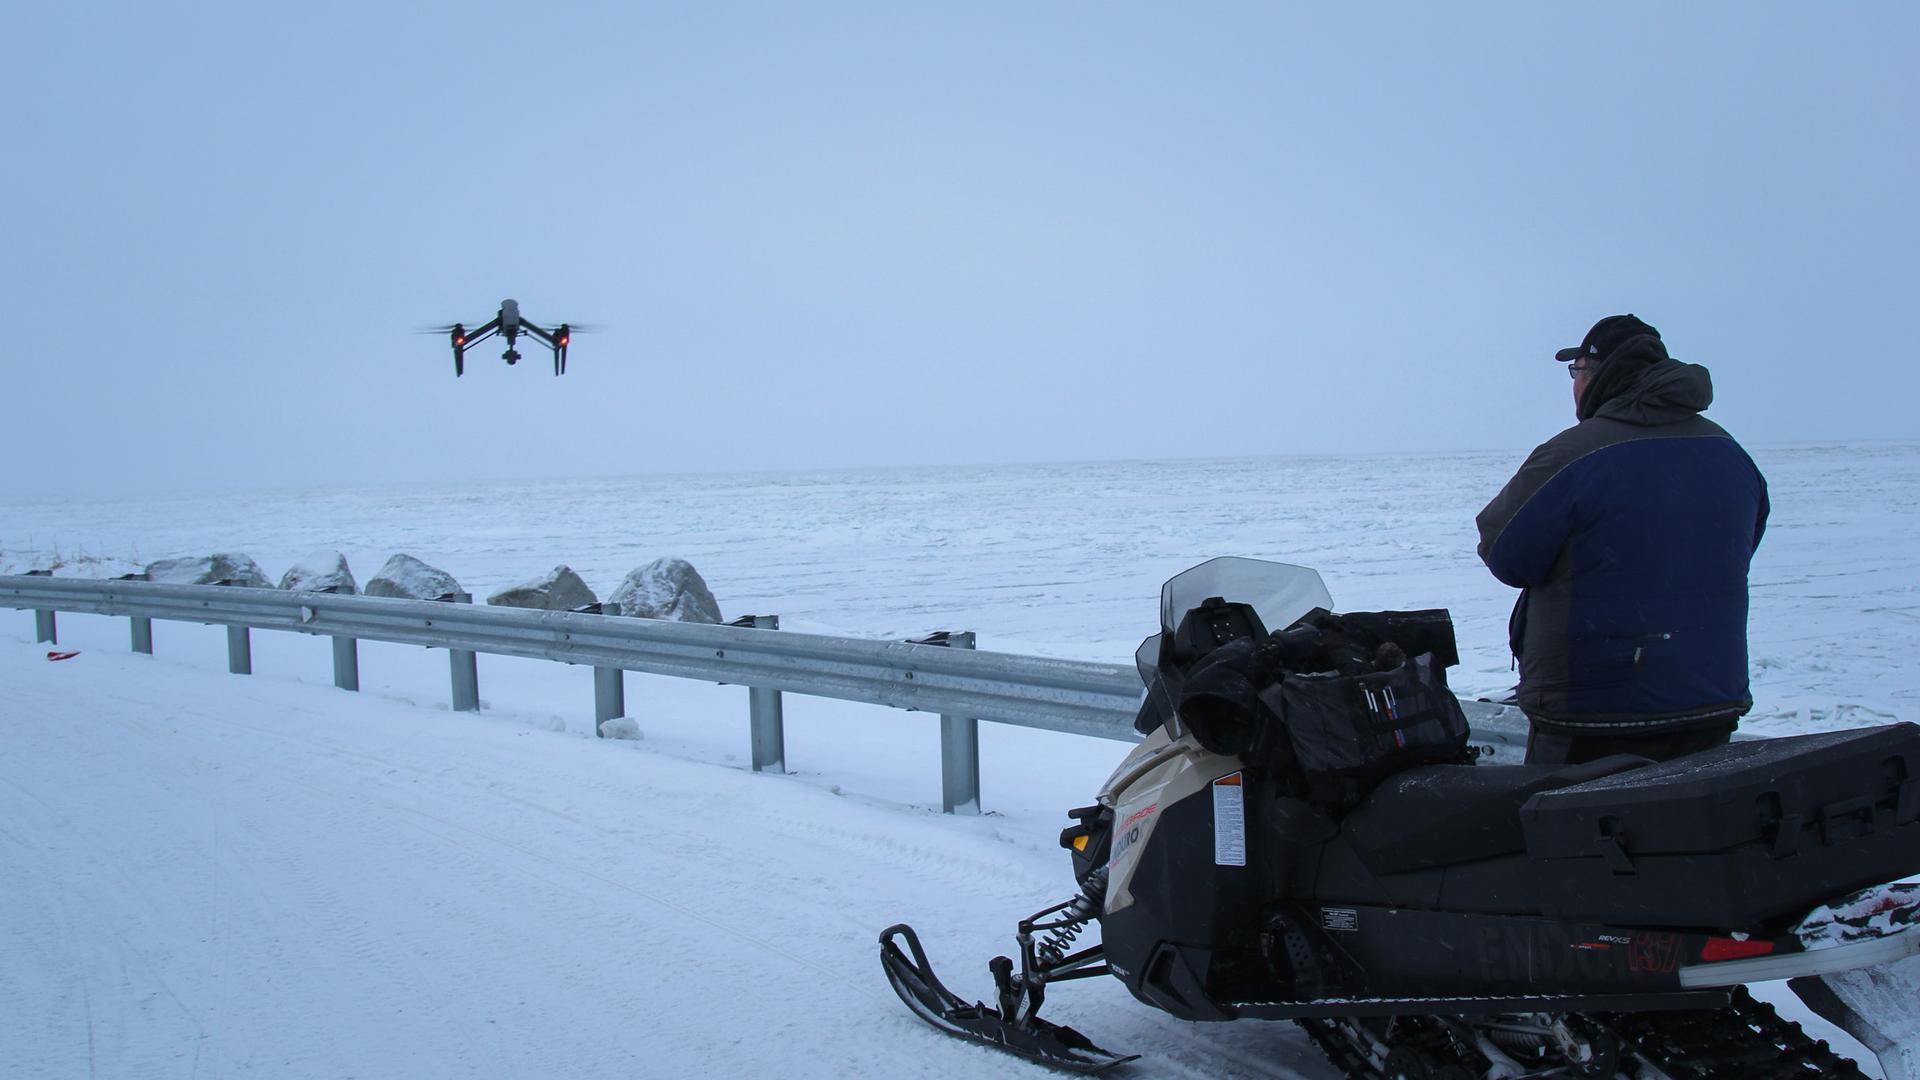 Subsistence hunter Dennis Davis sends his drone out over the ice on the Chukchi Sea in Shishmaref in far-western Alaska. Warming winters have made the sea ice here more dangerous to navigate in search of seals and walruses, but drones can help map the bes